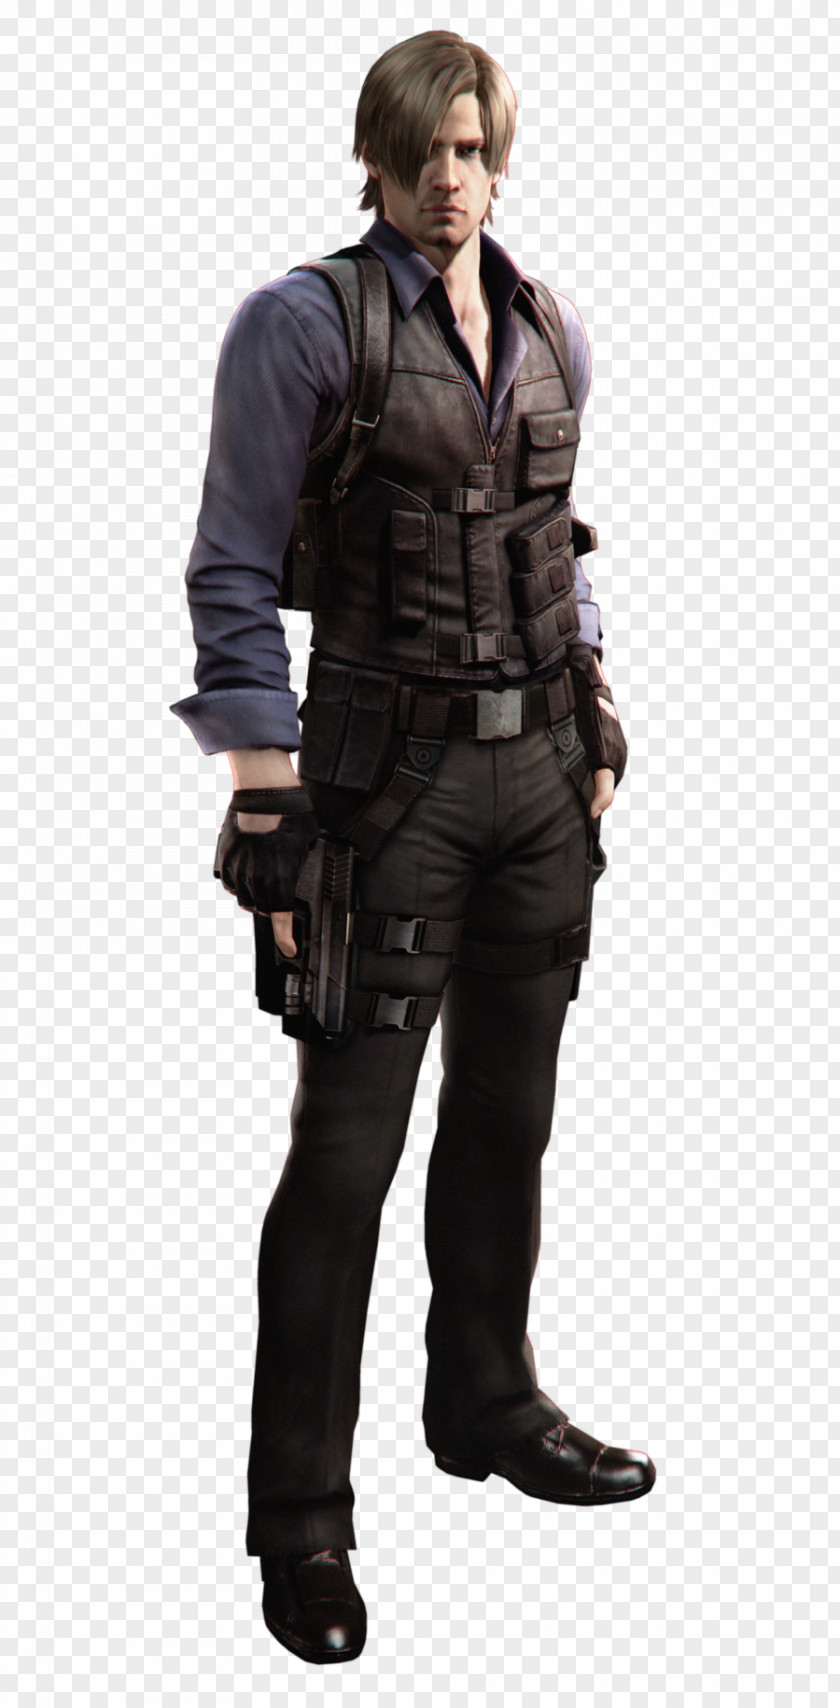 Resident Evil 6 2 Leon S. Kennedy Ada Wong 5 PNG